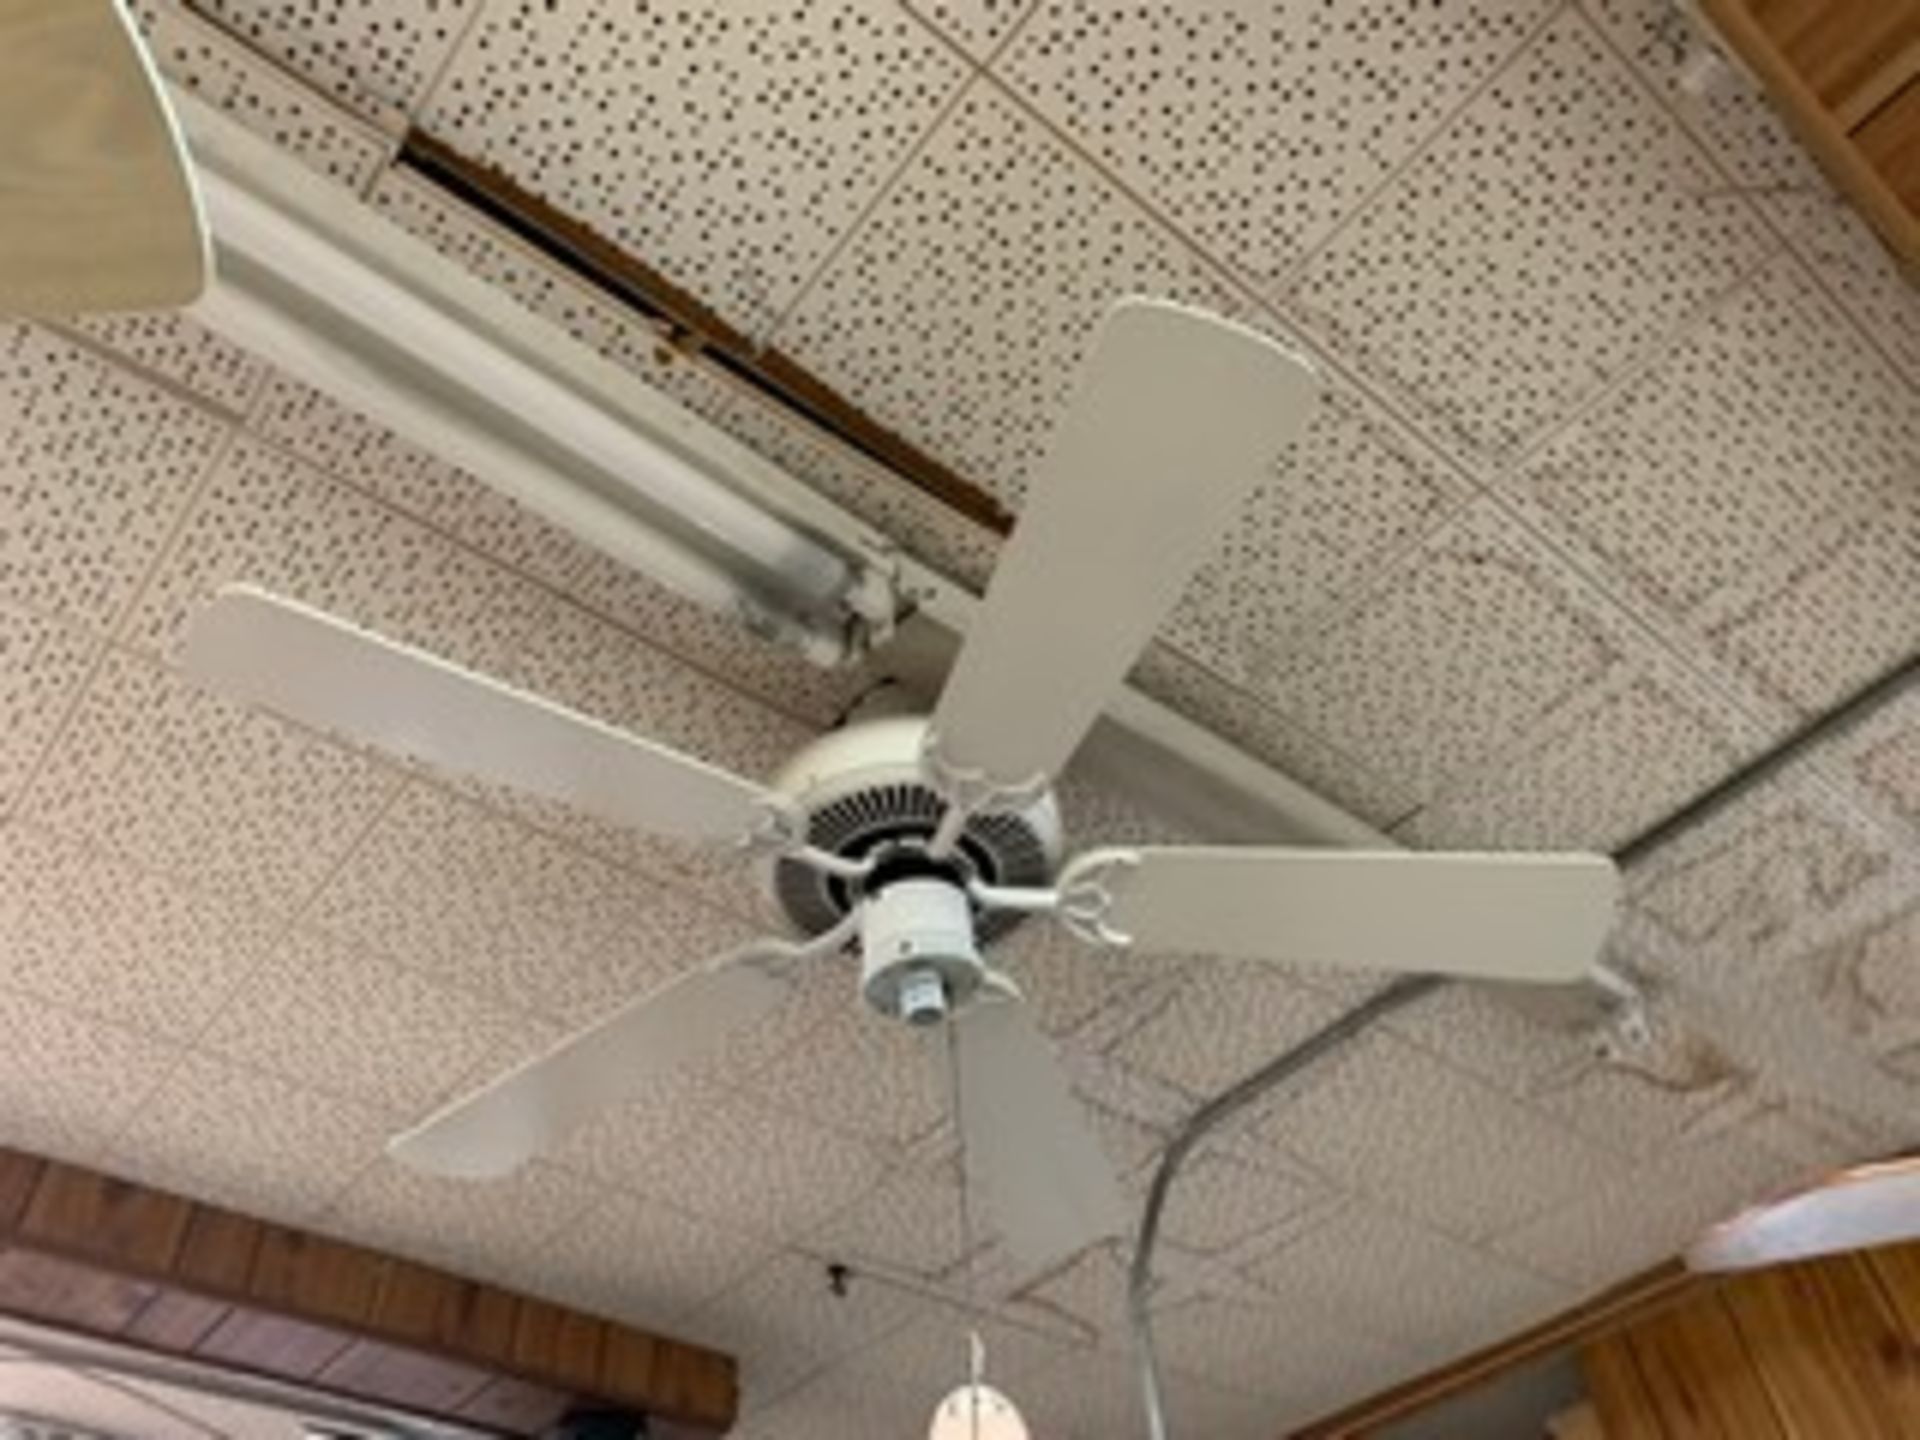 ASSORTED CEILING FANS - WHITE / OFF-WHITE - Image 4 of 4